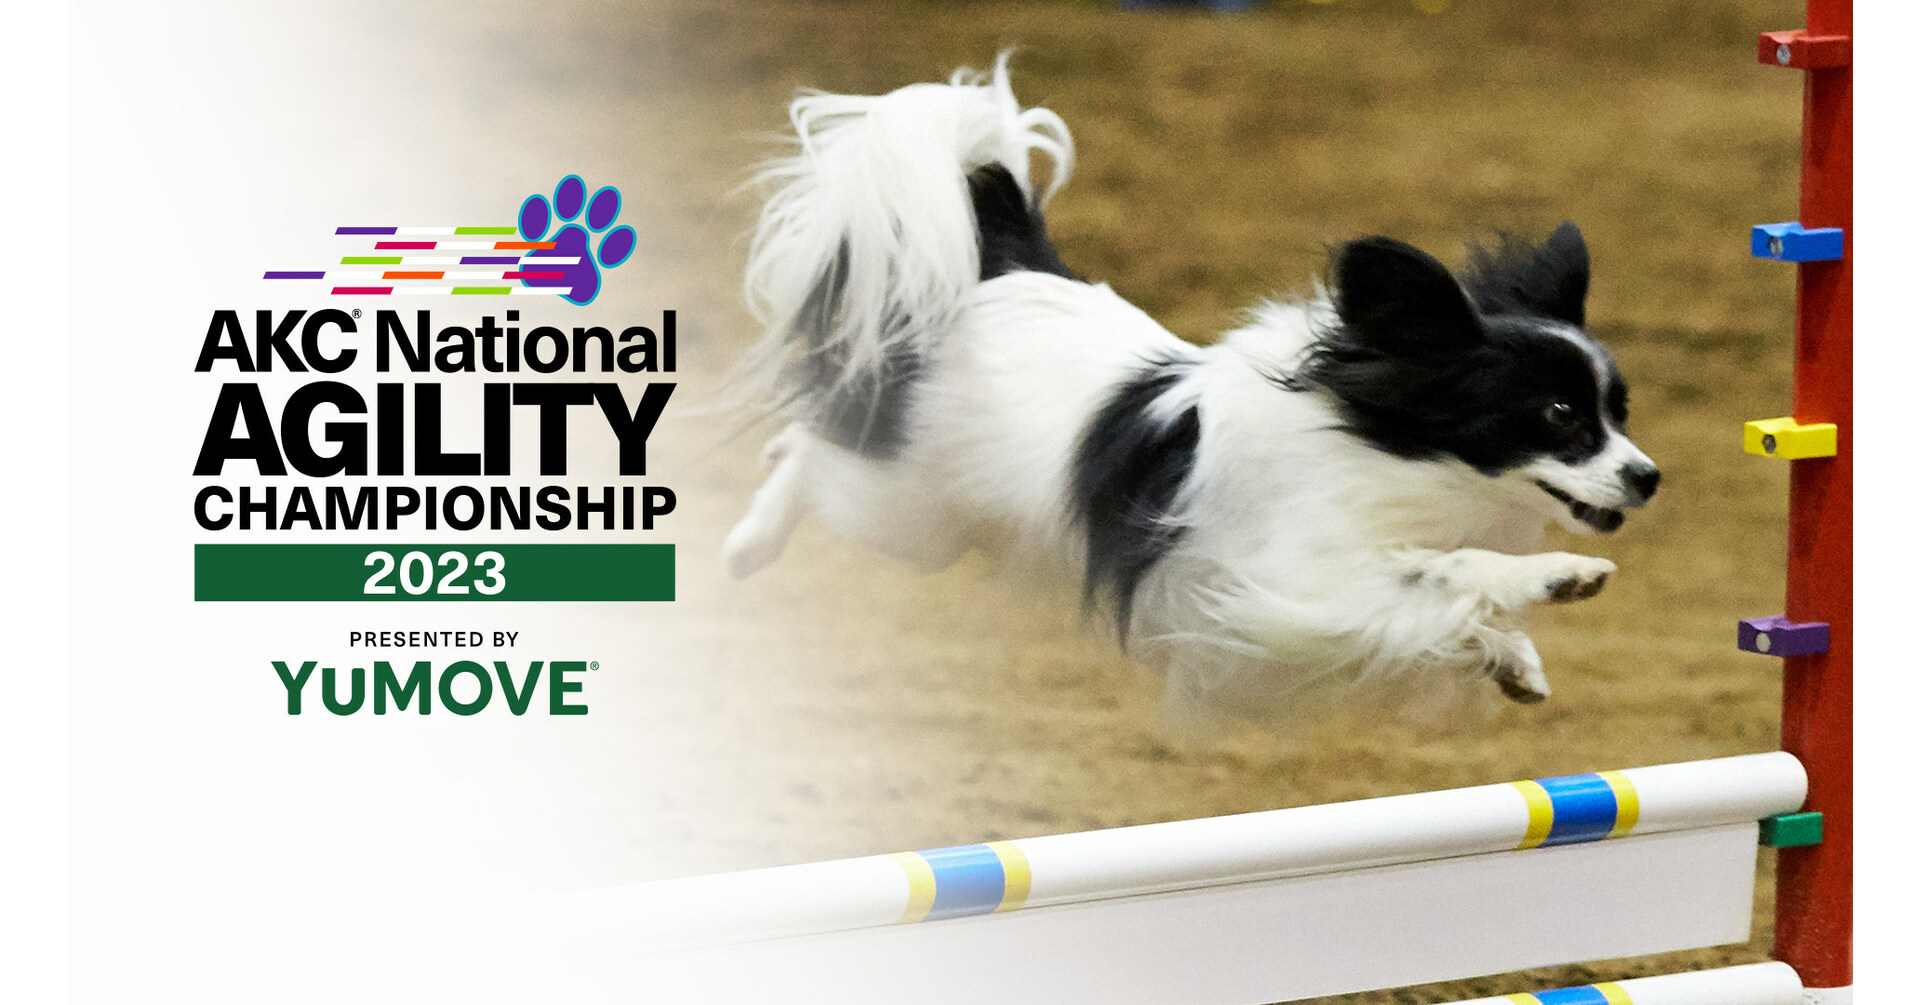 THE AMERICAN KENNEL CLUB NATIONAL AGILITY CHAMPIONSHIP LEAPS ONTO ESPN2